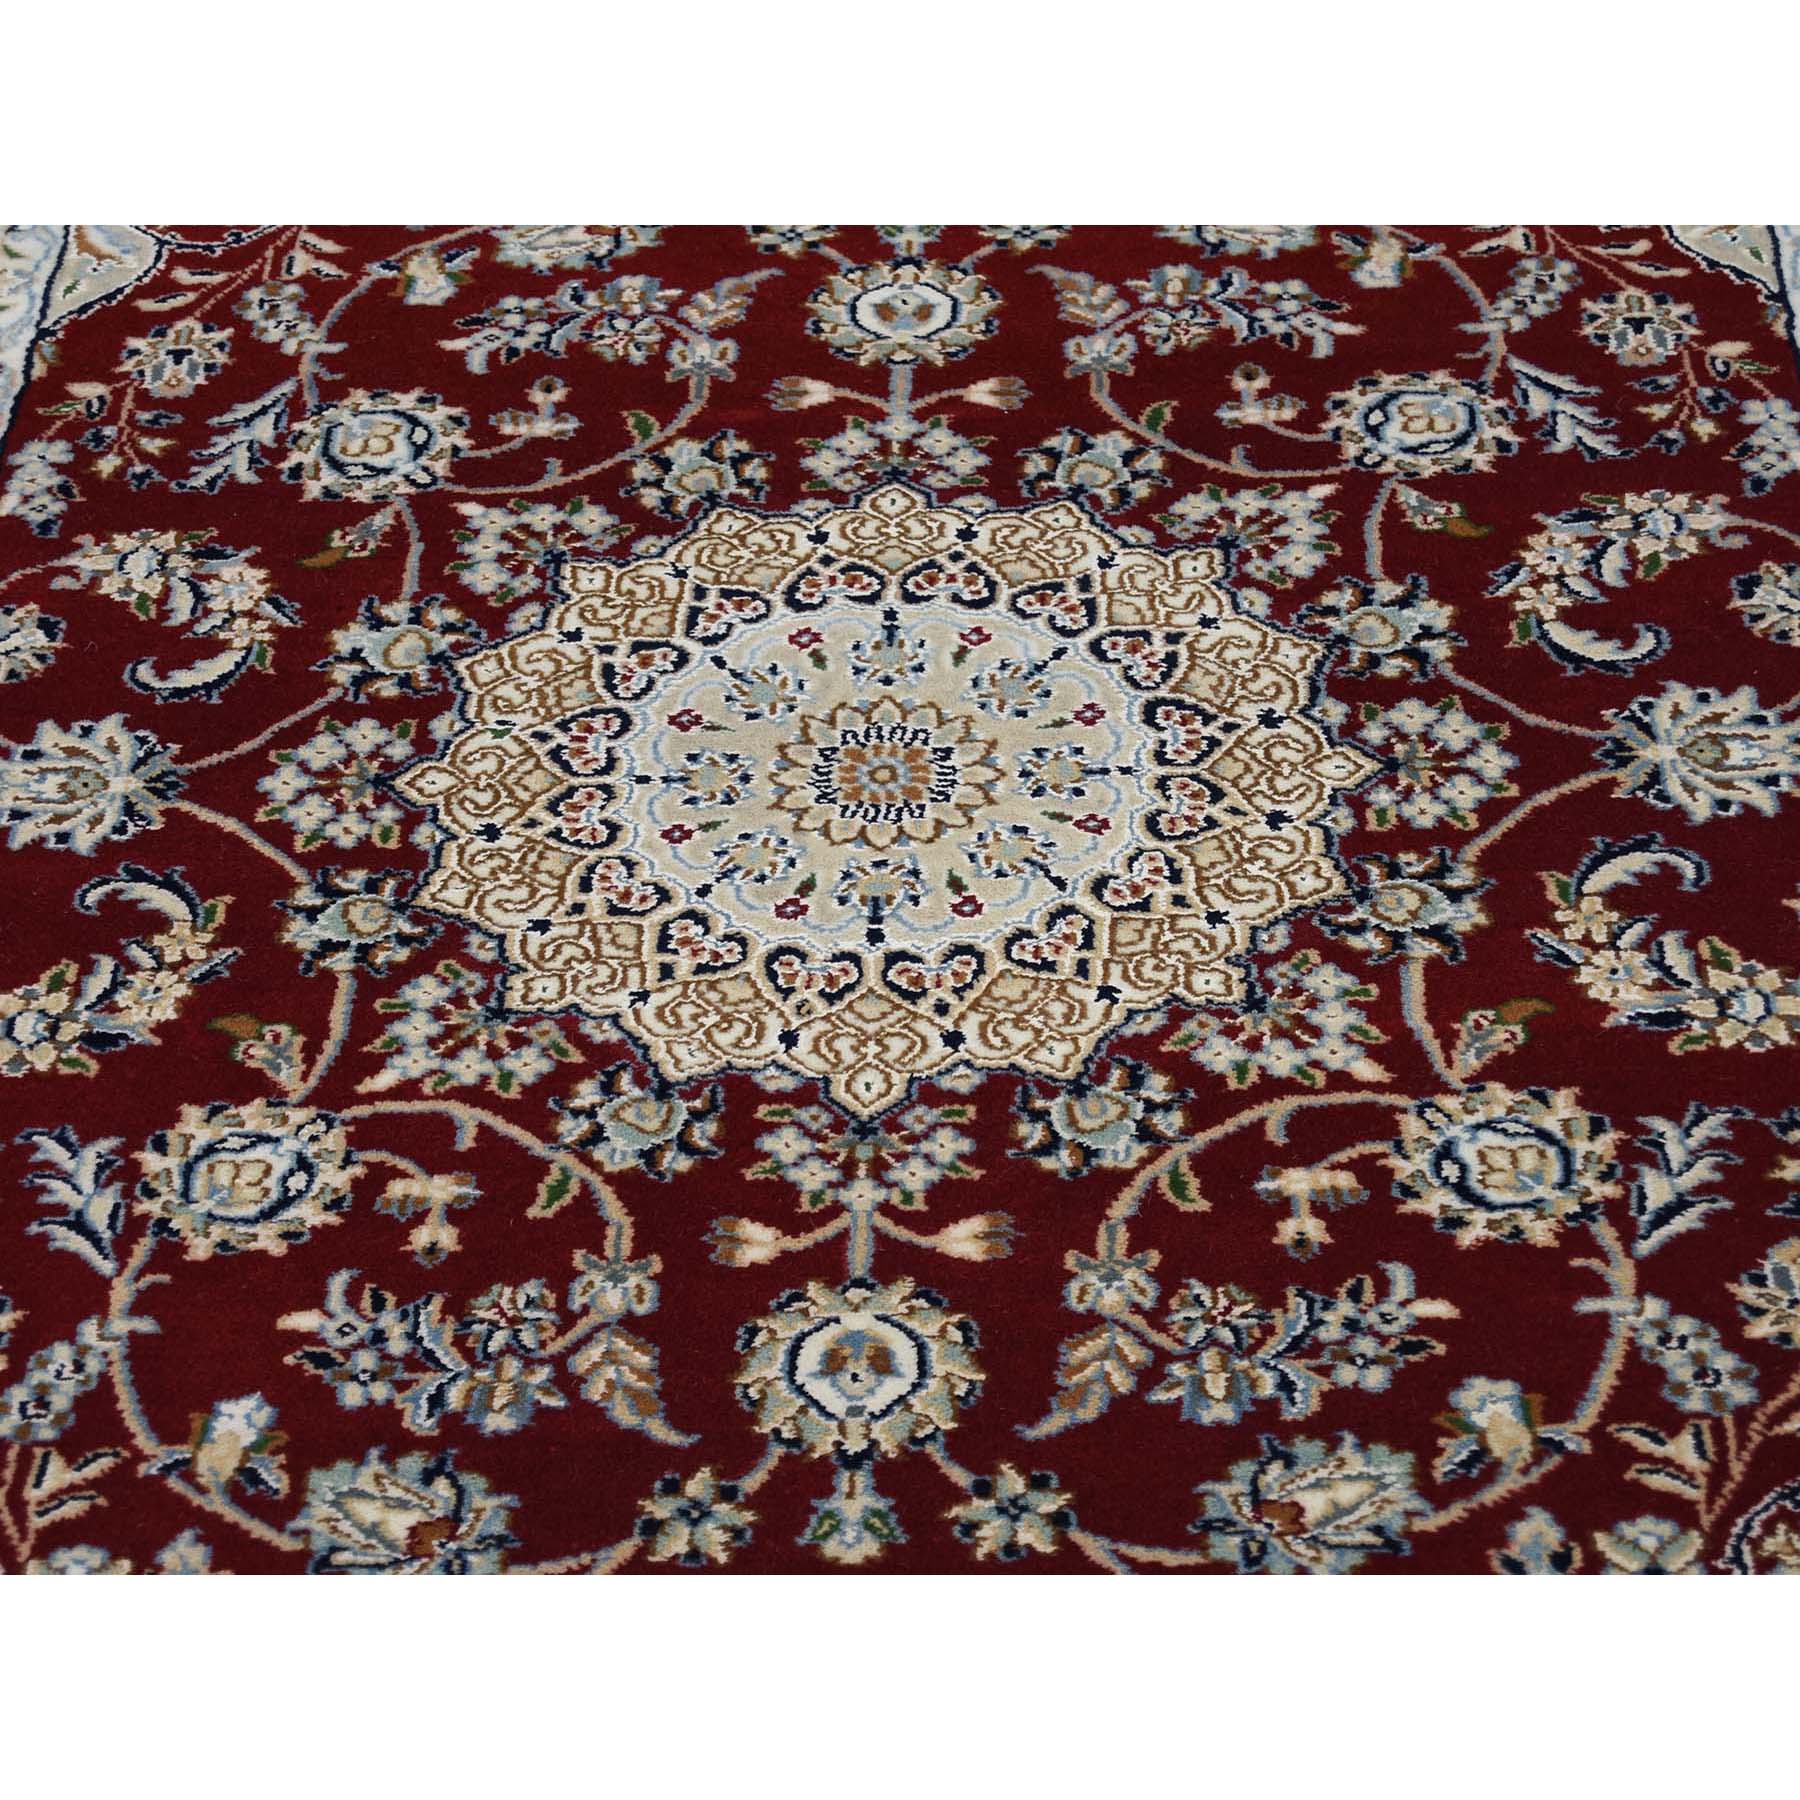 3-10 x6- 250 Kpsi Red Nain Wool and Silk Hand-Knotted Oriental Rug 